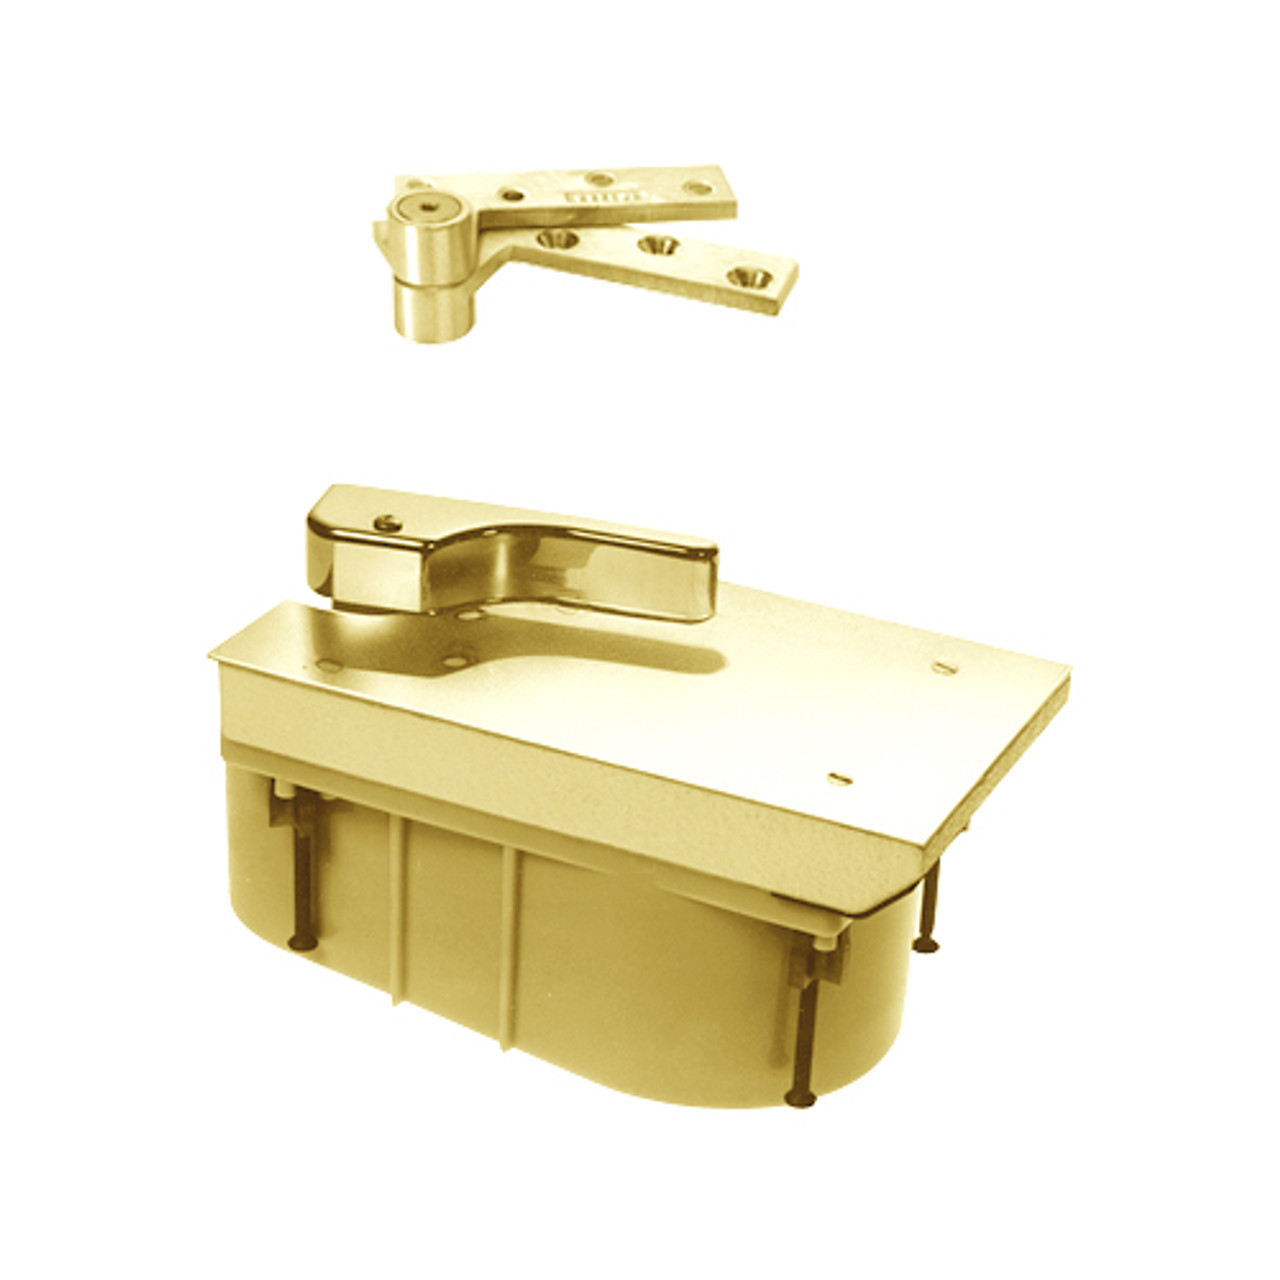 Q27-85S-LFP-LH-605 Rixson 27 Series Heavy Duty Quick Install Offset Hung Floor Closer in Bright Brass Finish